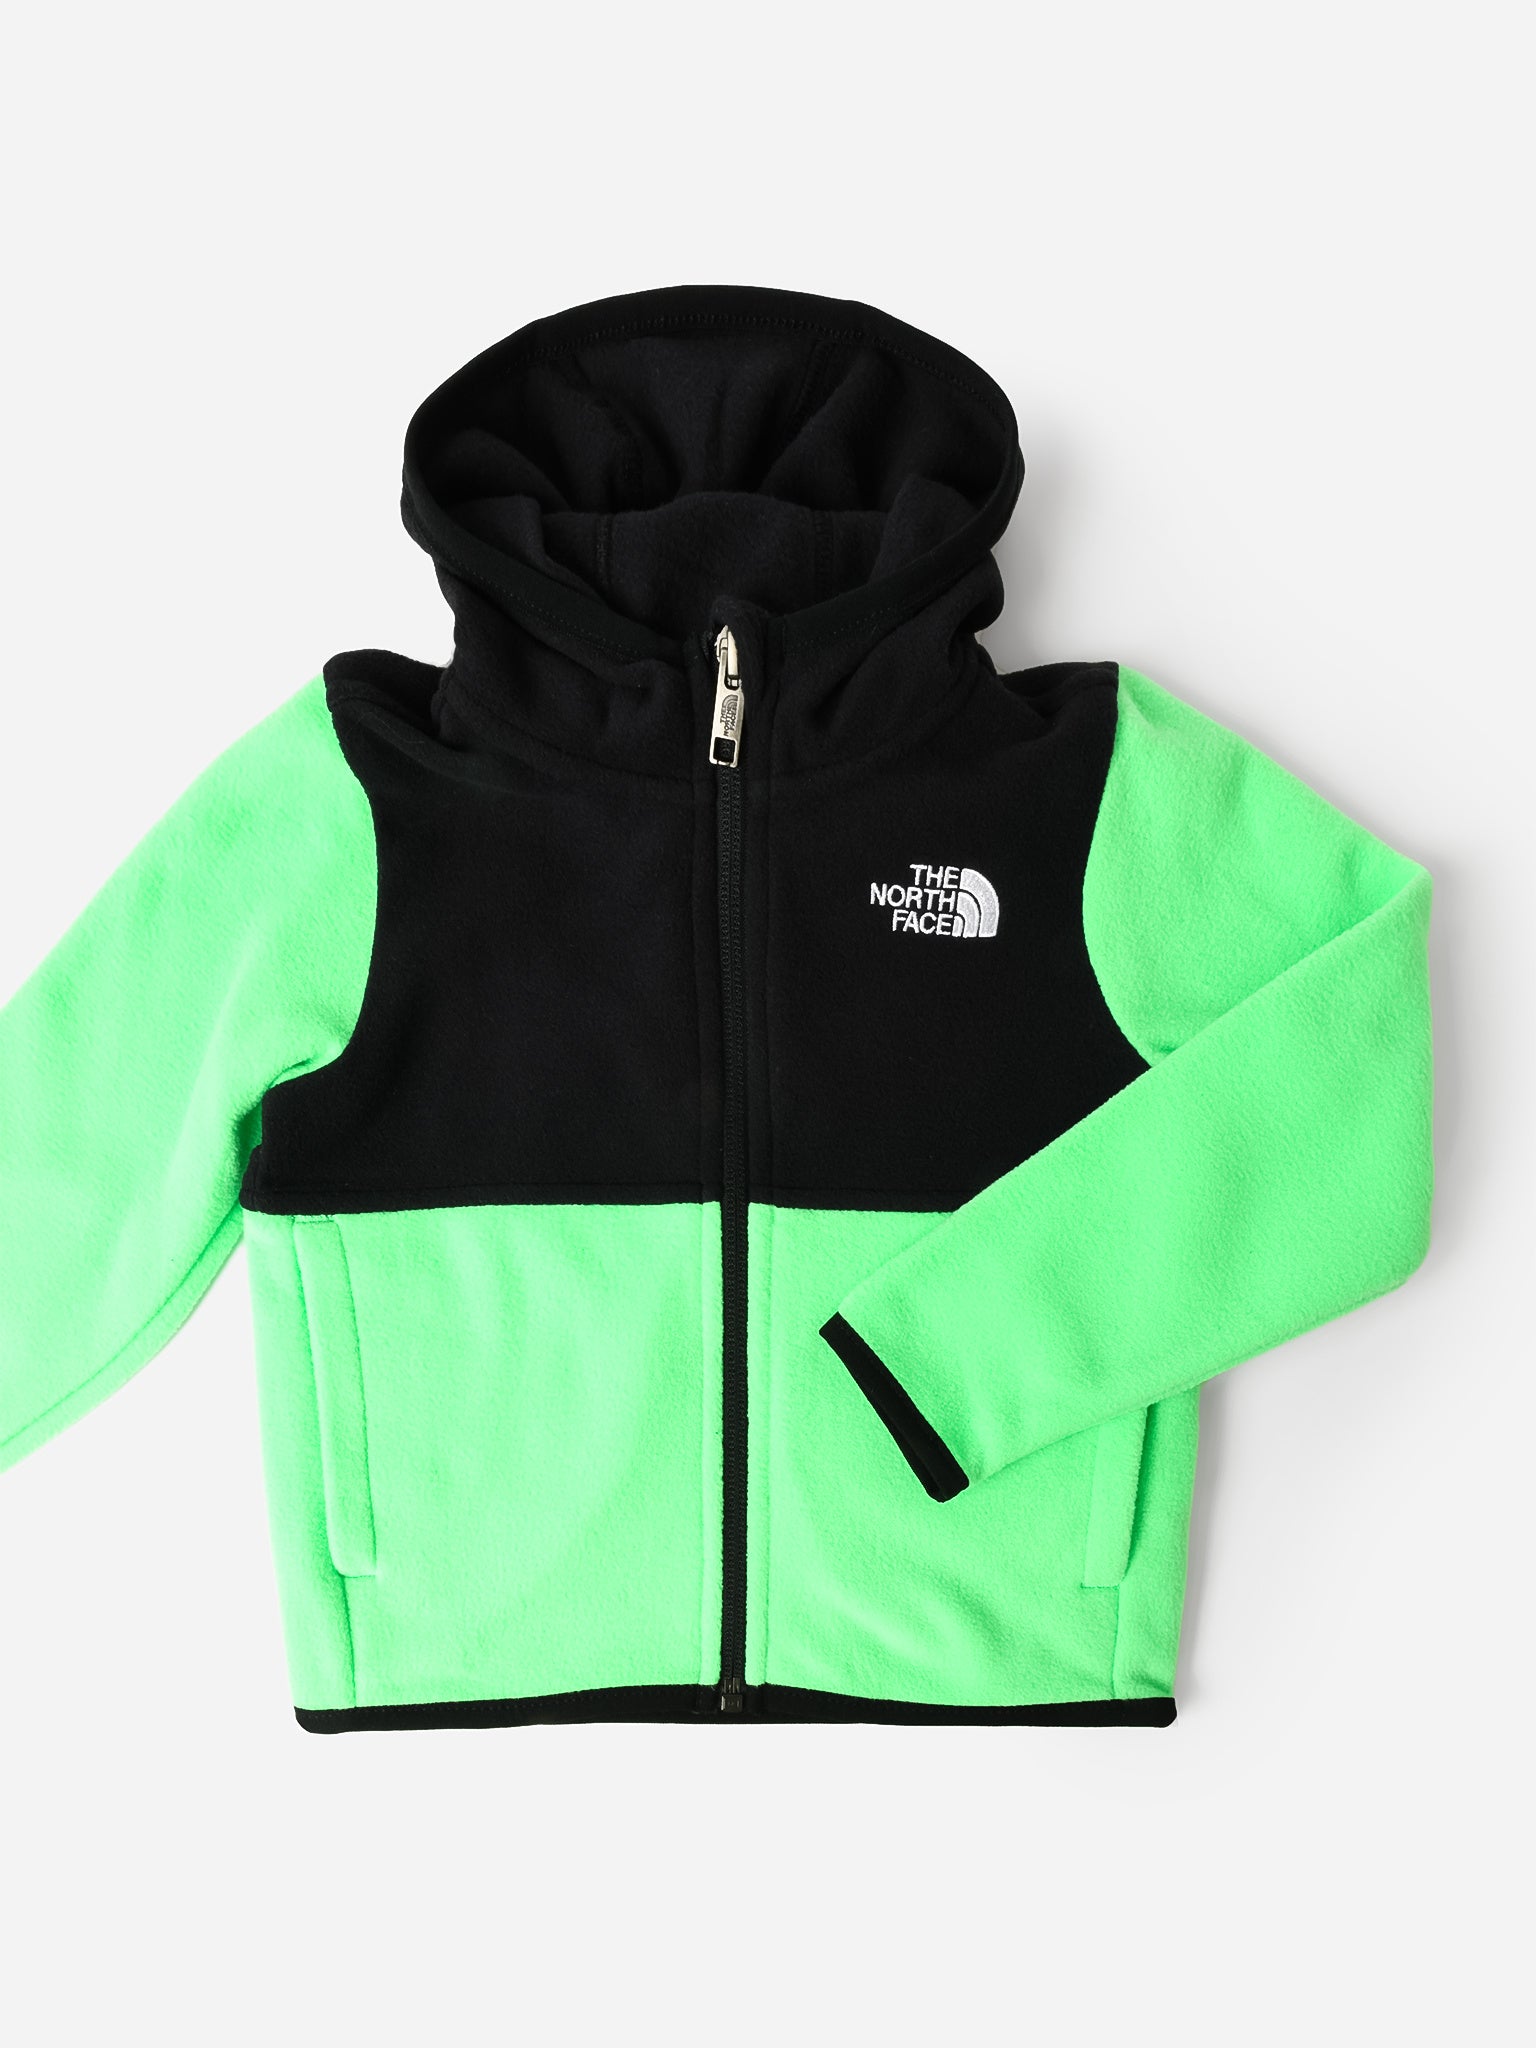 The North Face 1966 Short-Sleeve Hoodie - Men's - Clothing